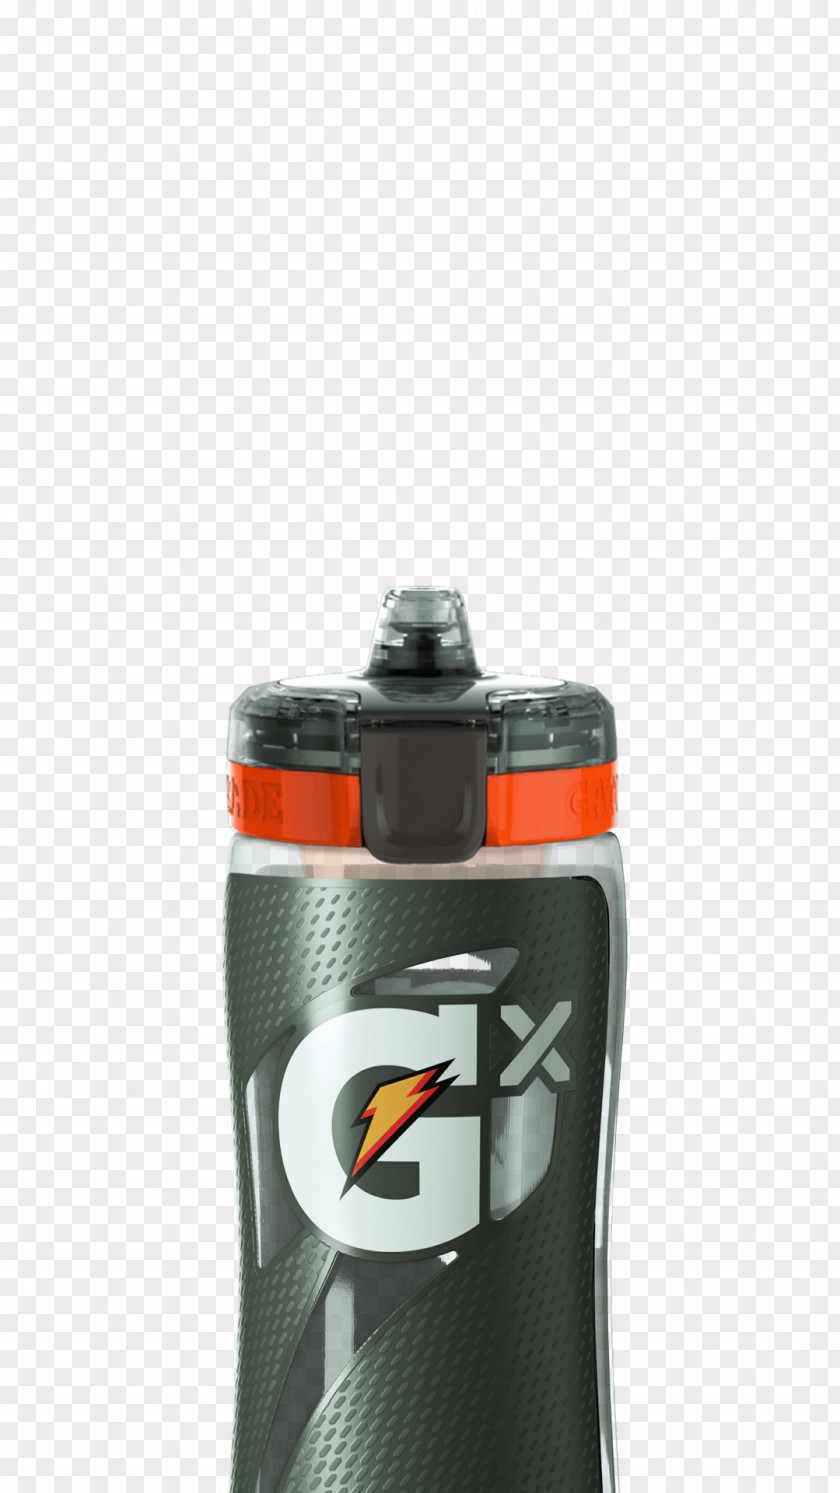 Drink Sports & Energy Drinks Water Bottles The Gatorade Company PNG